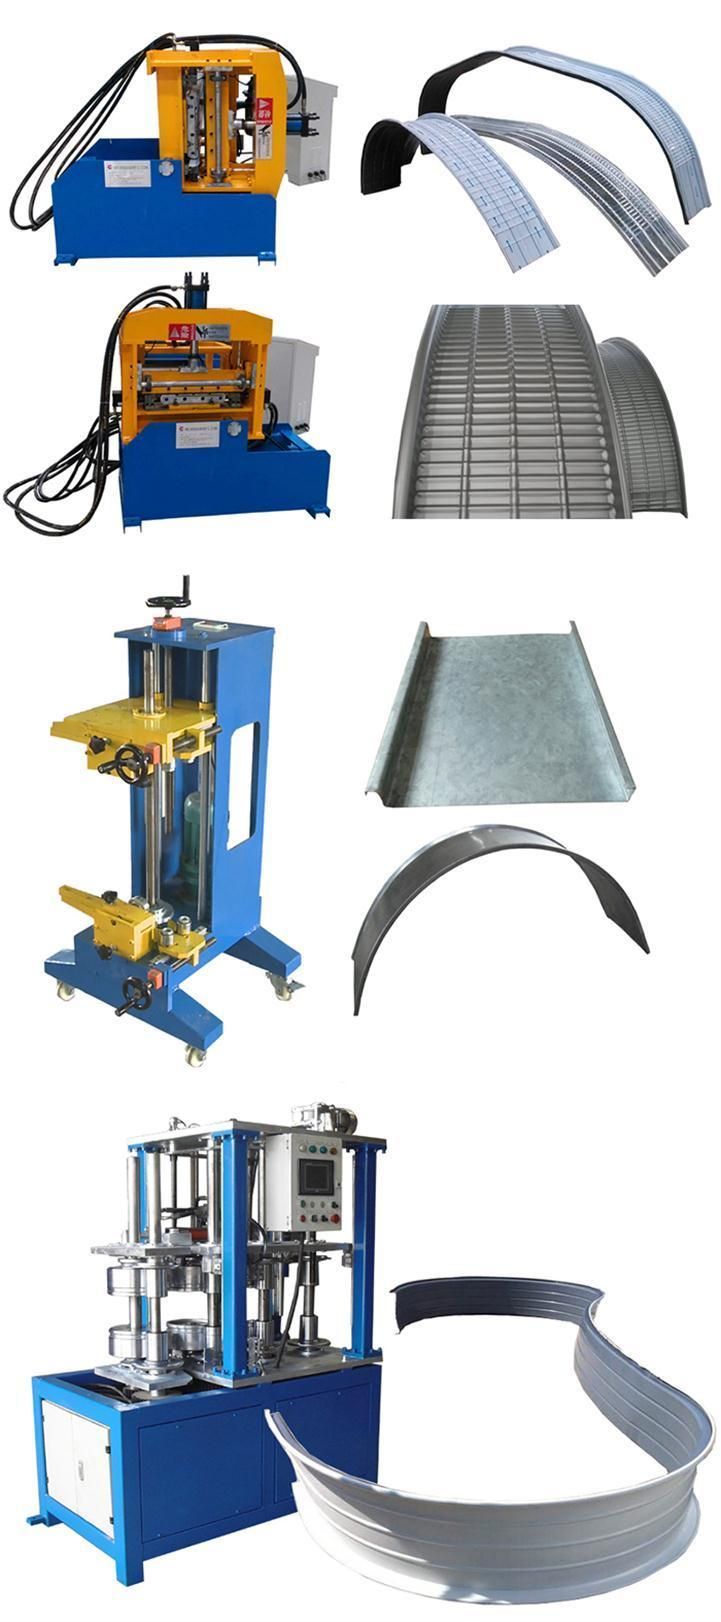 Hot Market Requirement Automatic Hydraulic Roof Crimping Metal Sheet Bending Machine From China Trusty Manufacturer